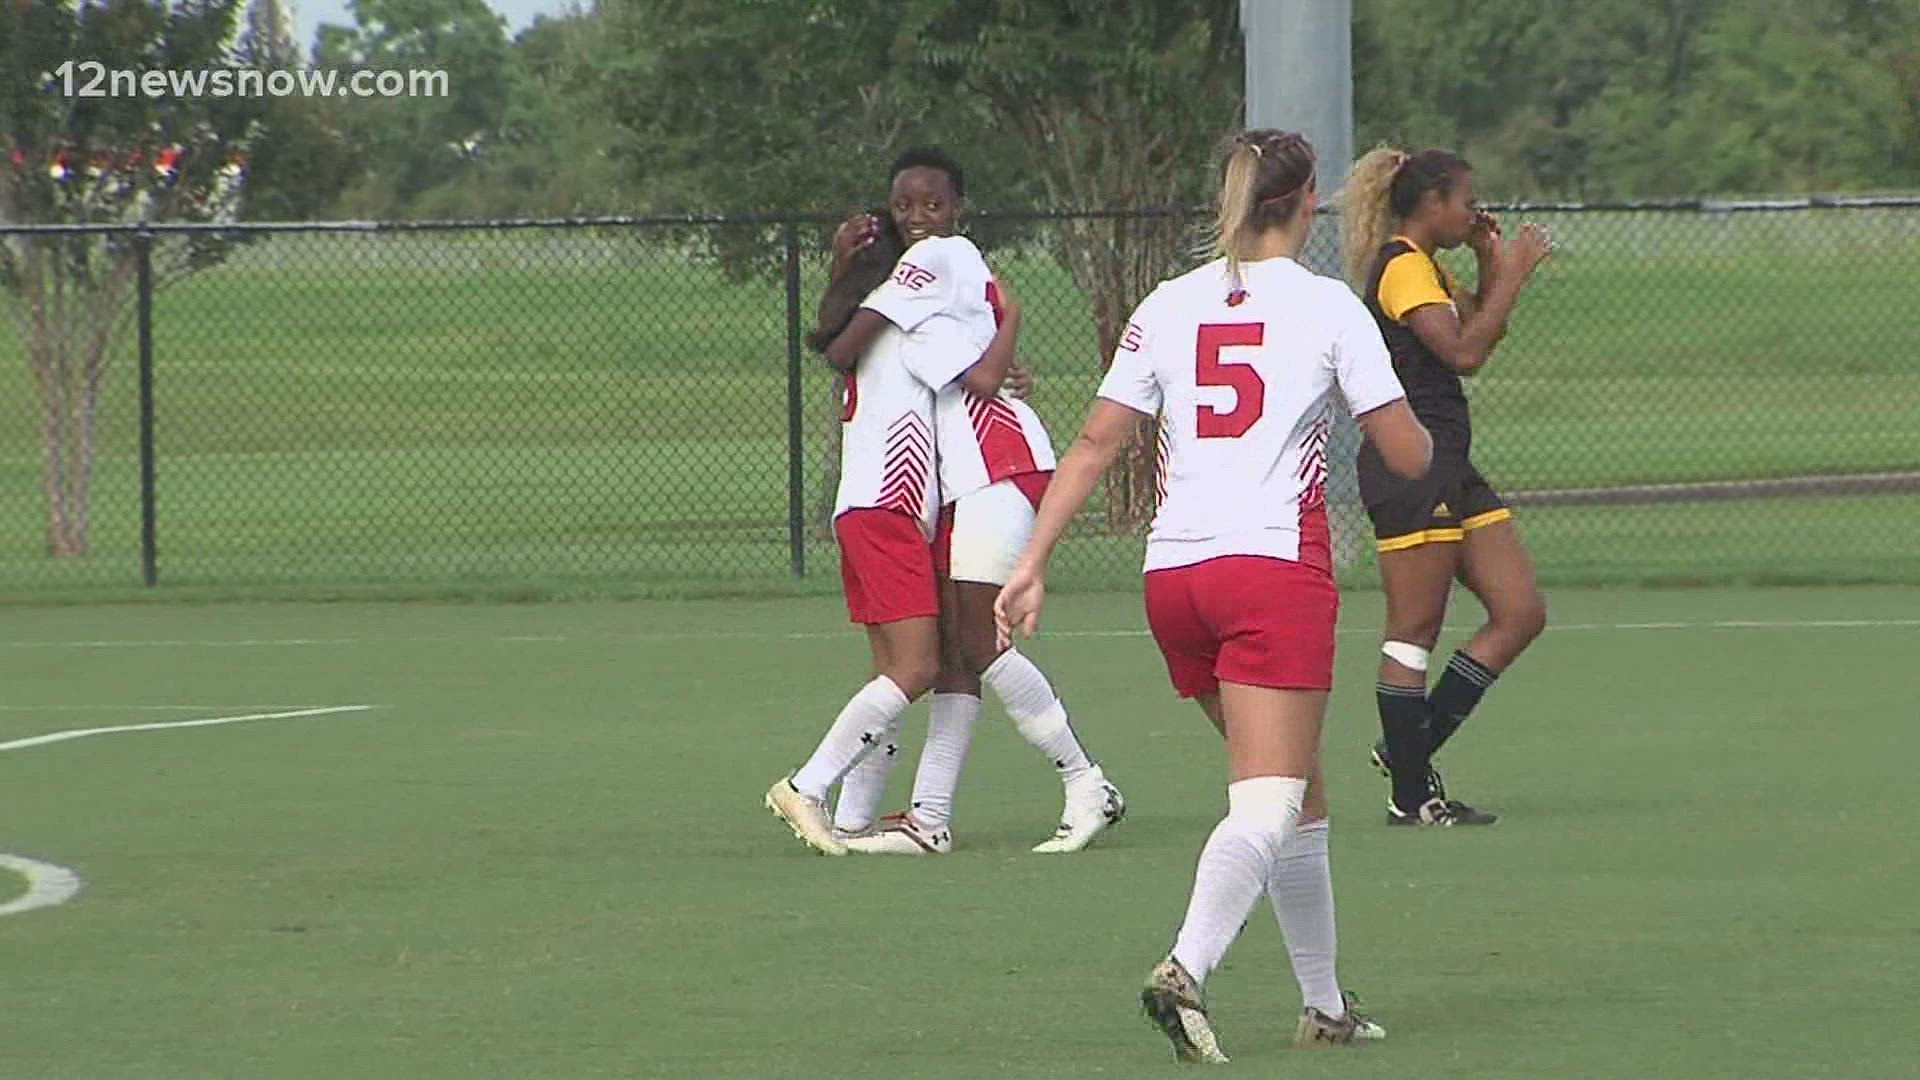 Cardinals take it to Grambling State on the pitch